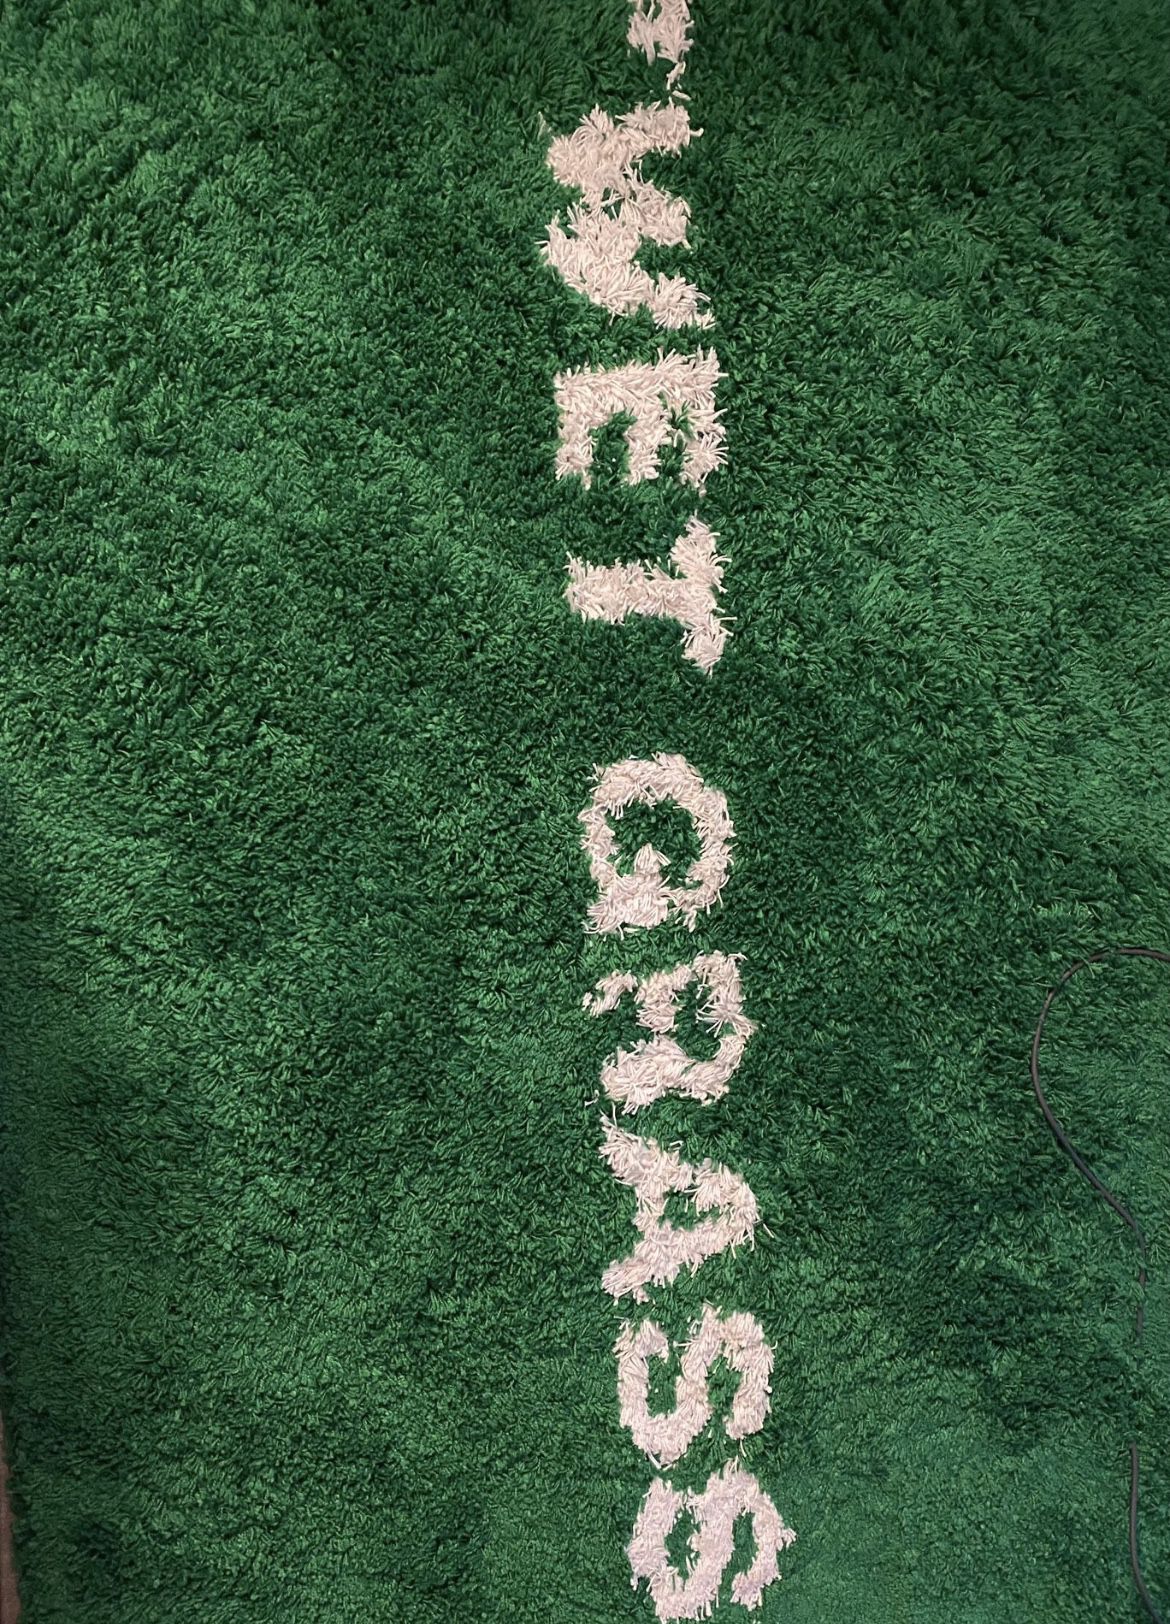 Off White “Wet Grass” Rug for Sale in La Honda, CA - OfferUp